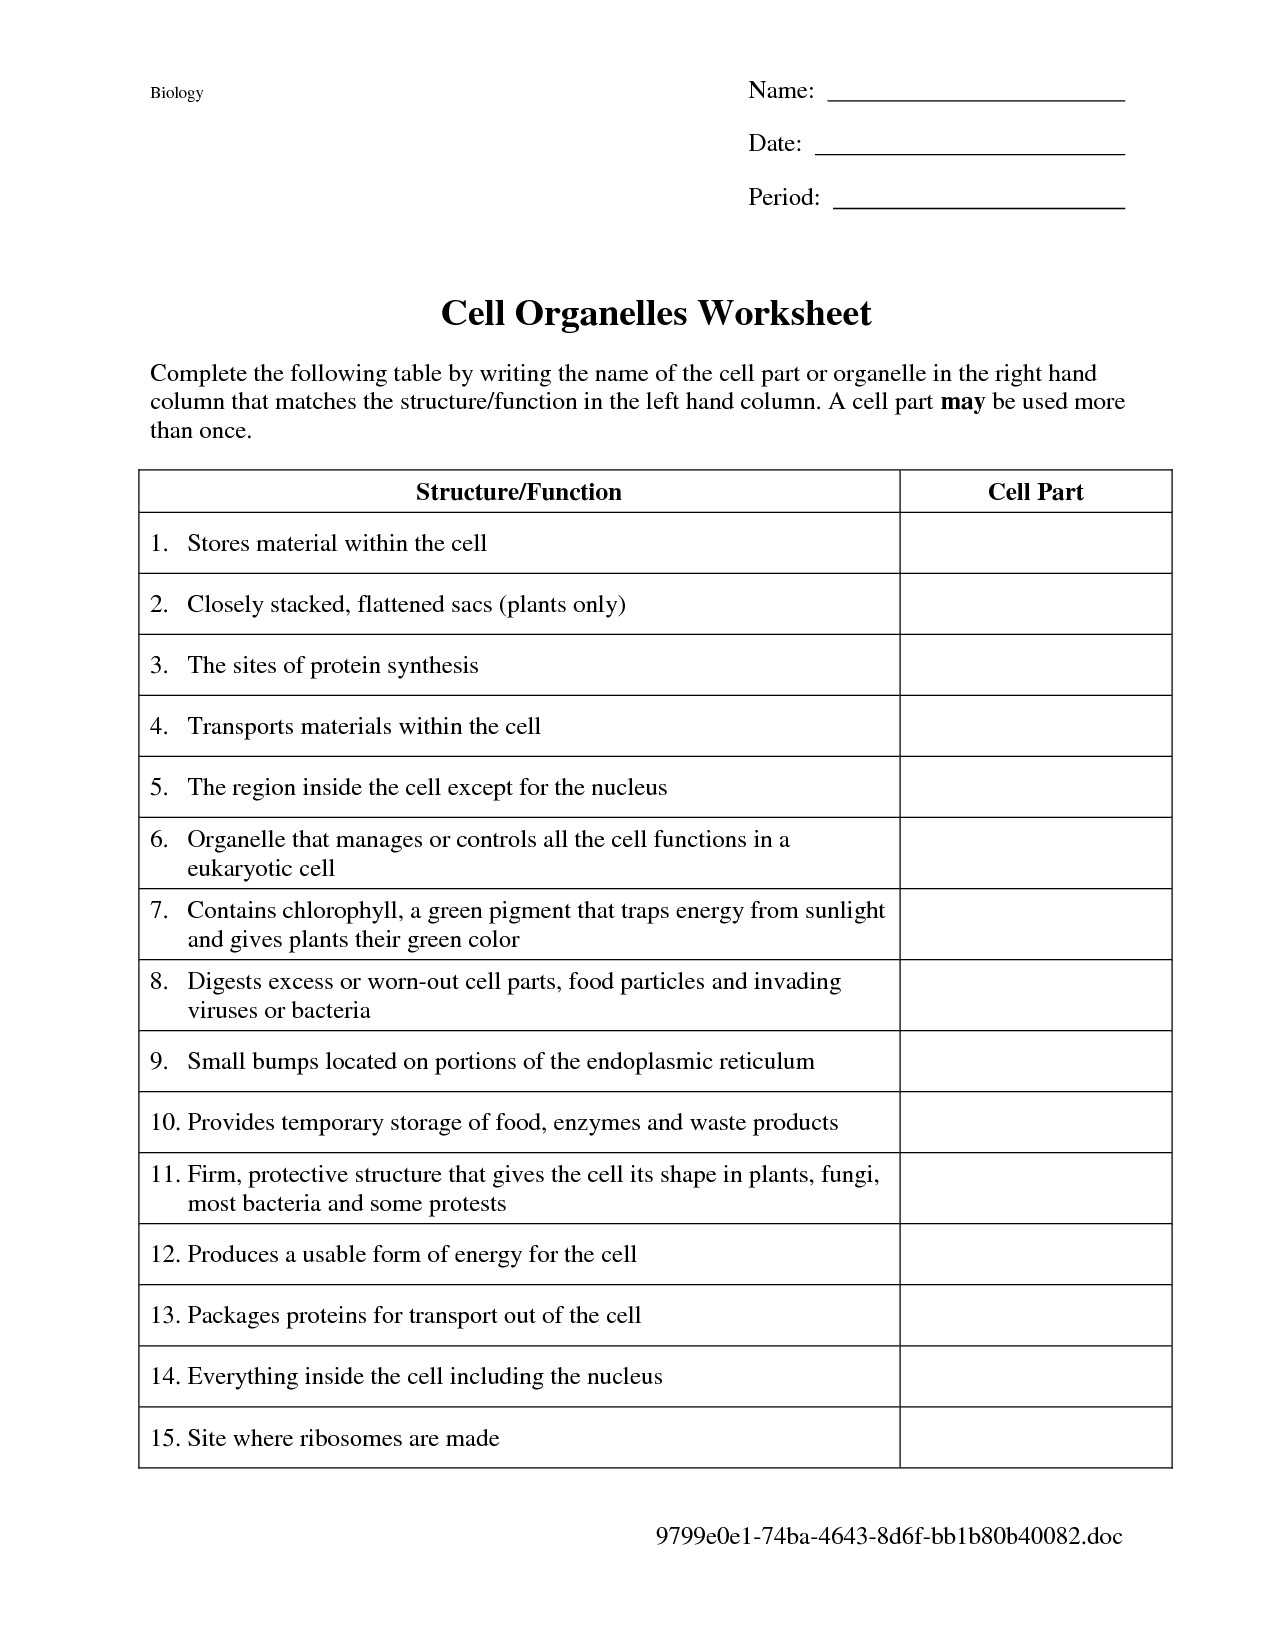 Energy Transformation Worksheet Answers or 34 New Energy Transformation Worksheet Answers